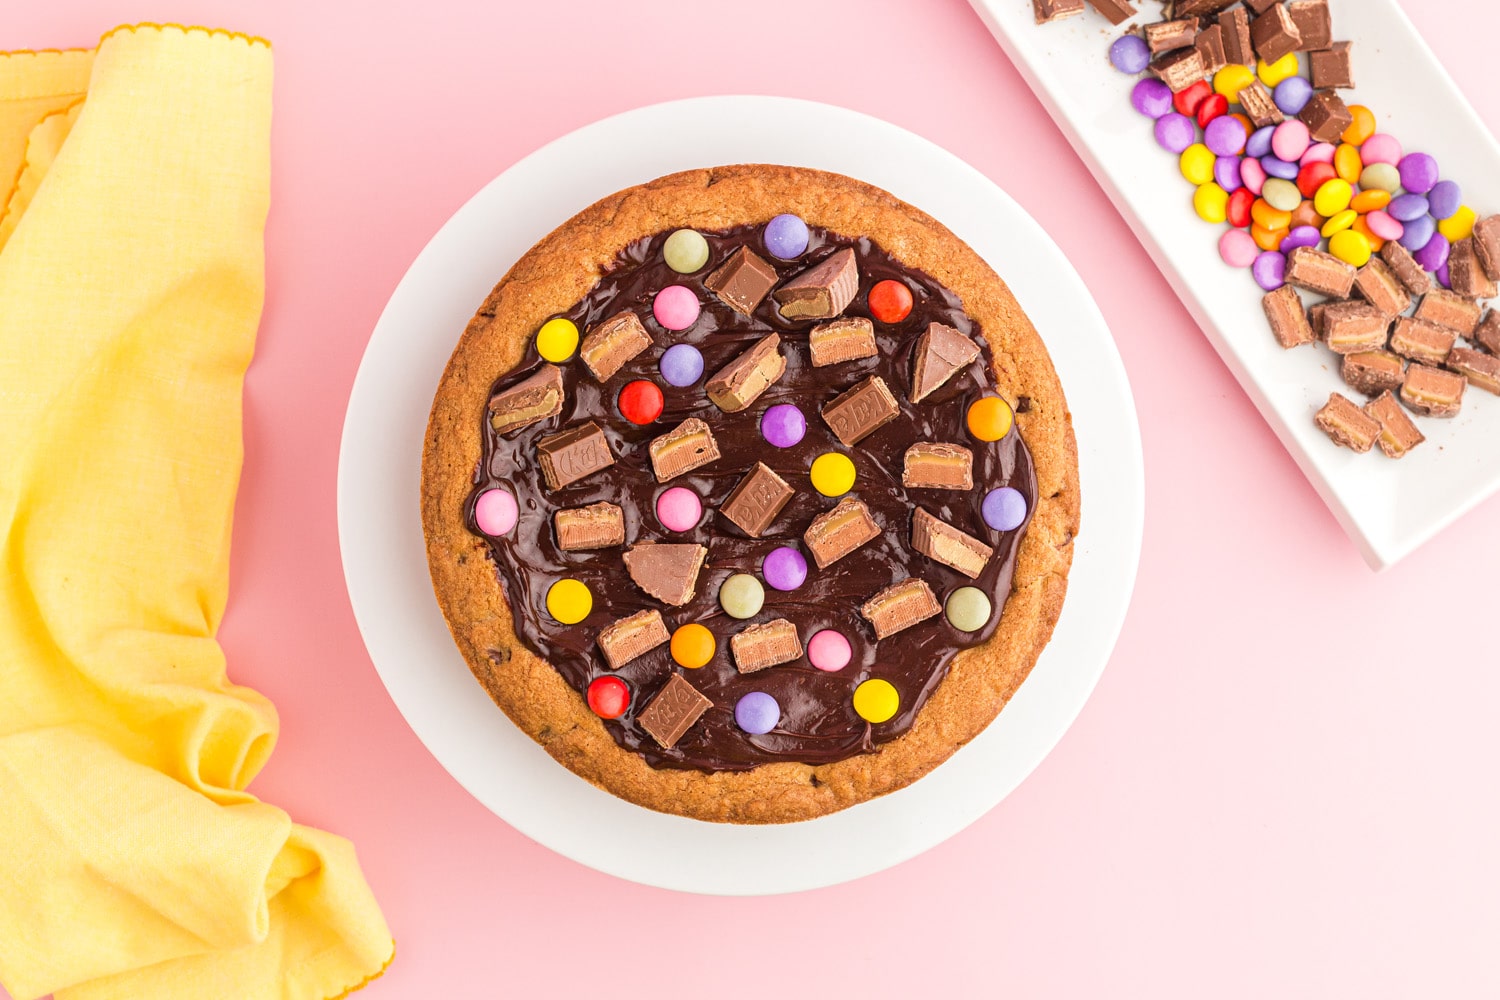 Pastel candies and chocolate chunks added to ganache topping of chocolate chip cookie cake